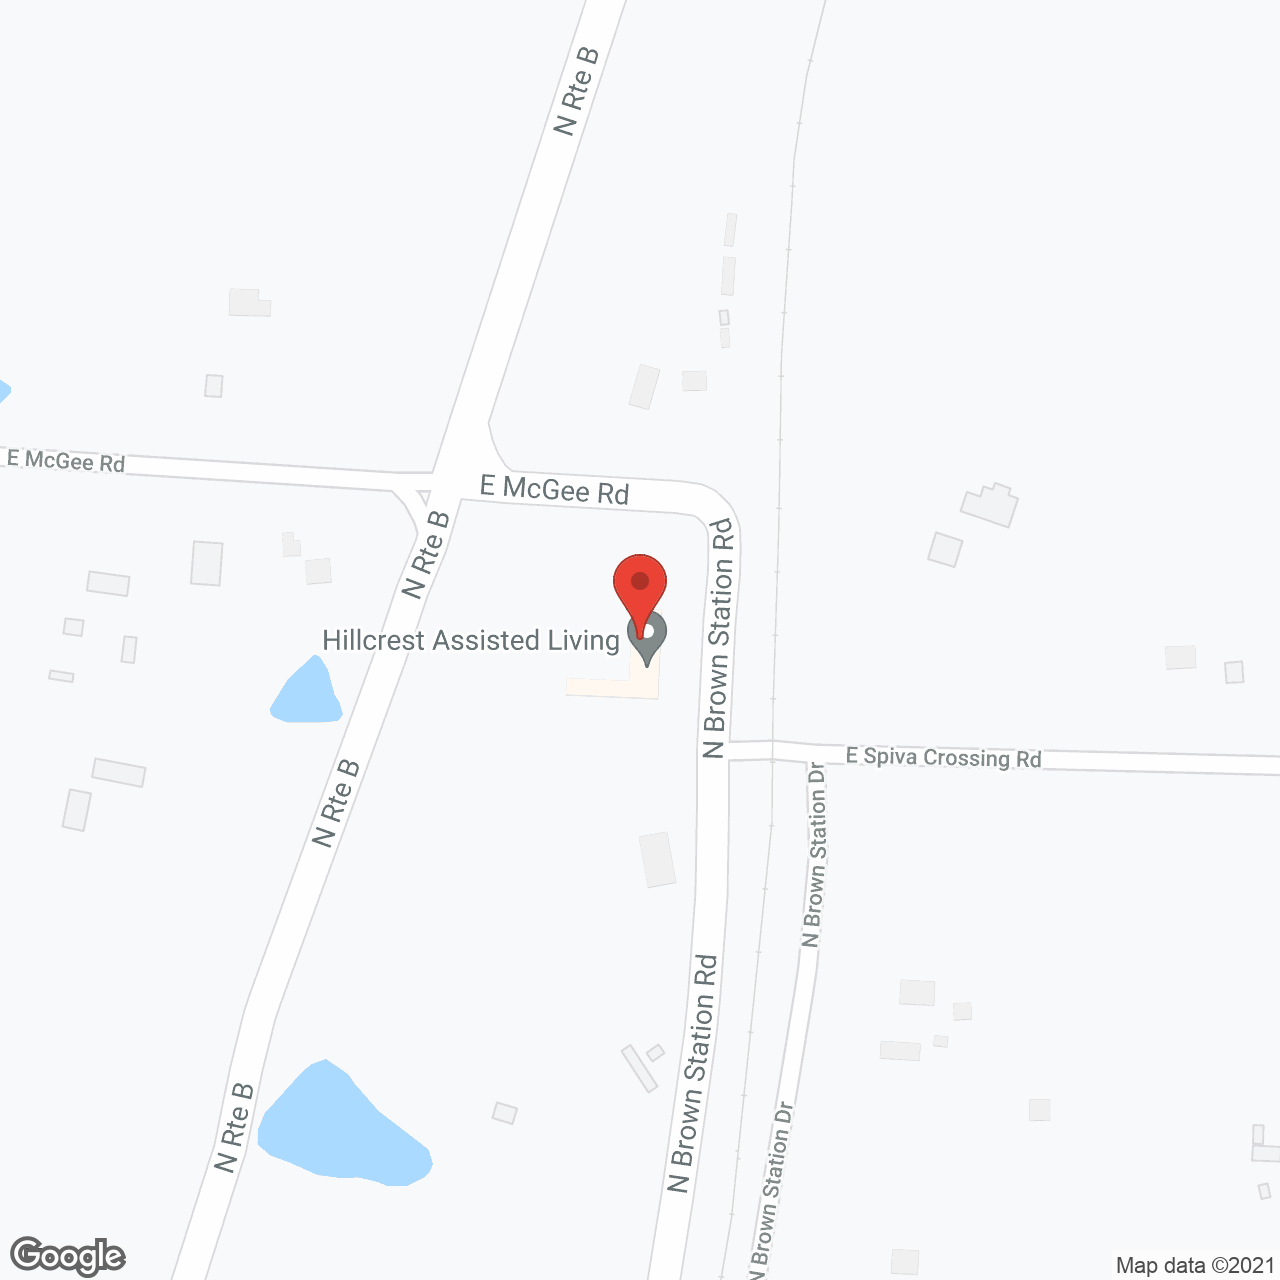 Hillcrest Assisted Living in google map